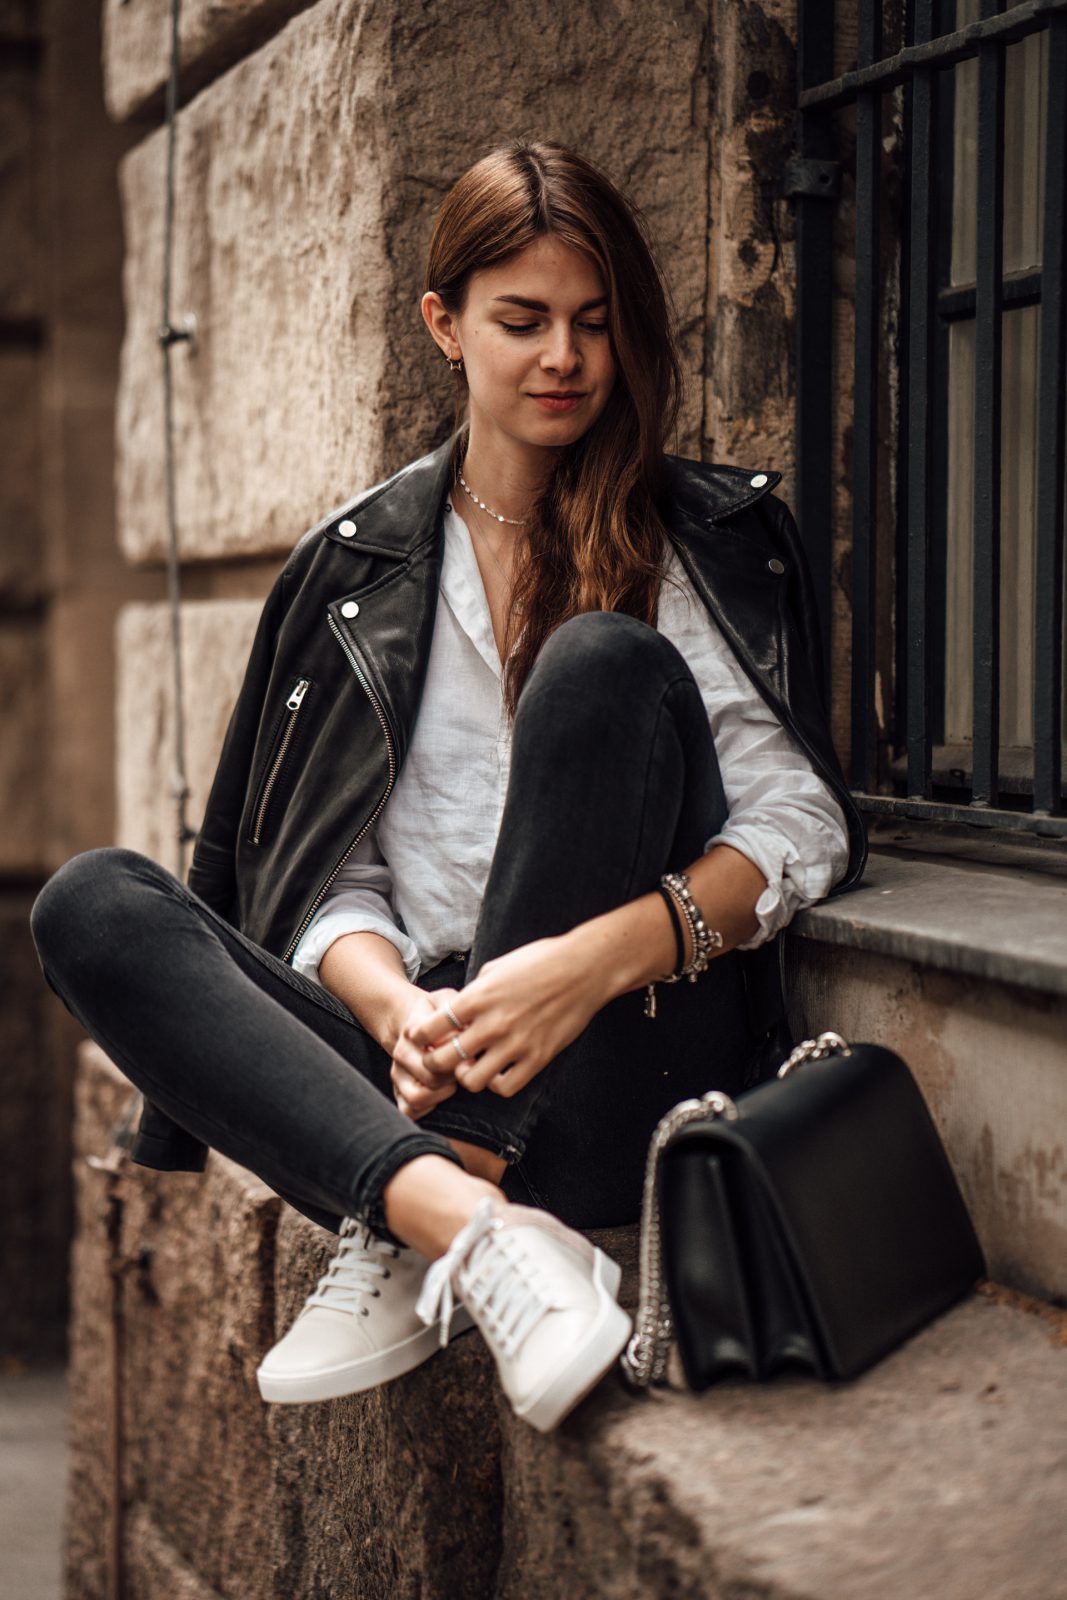 Woman's Outfit Idea: Leather Jacket and White Shirt || Casual Chic Outfit